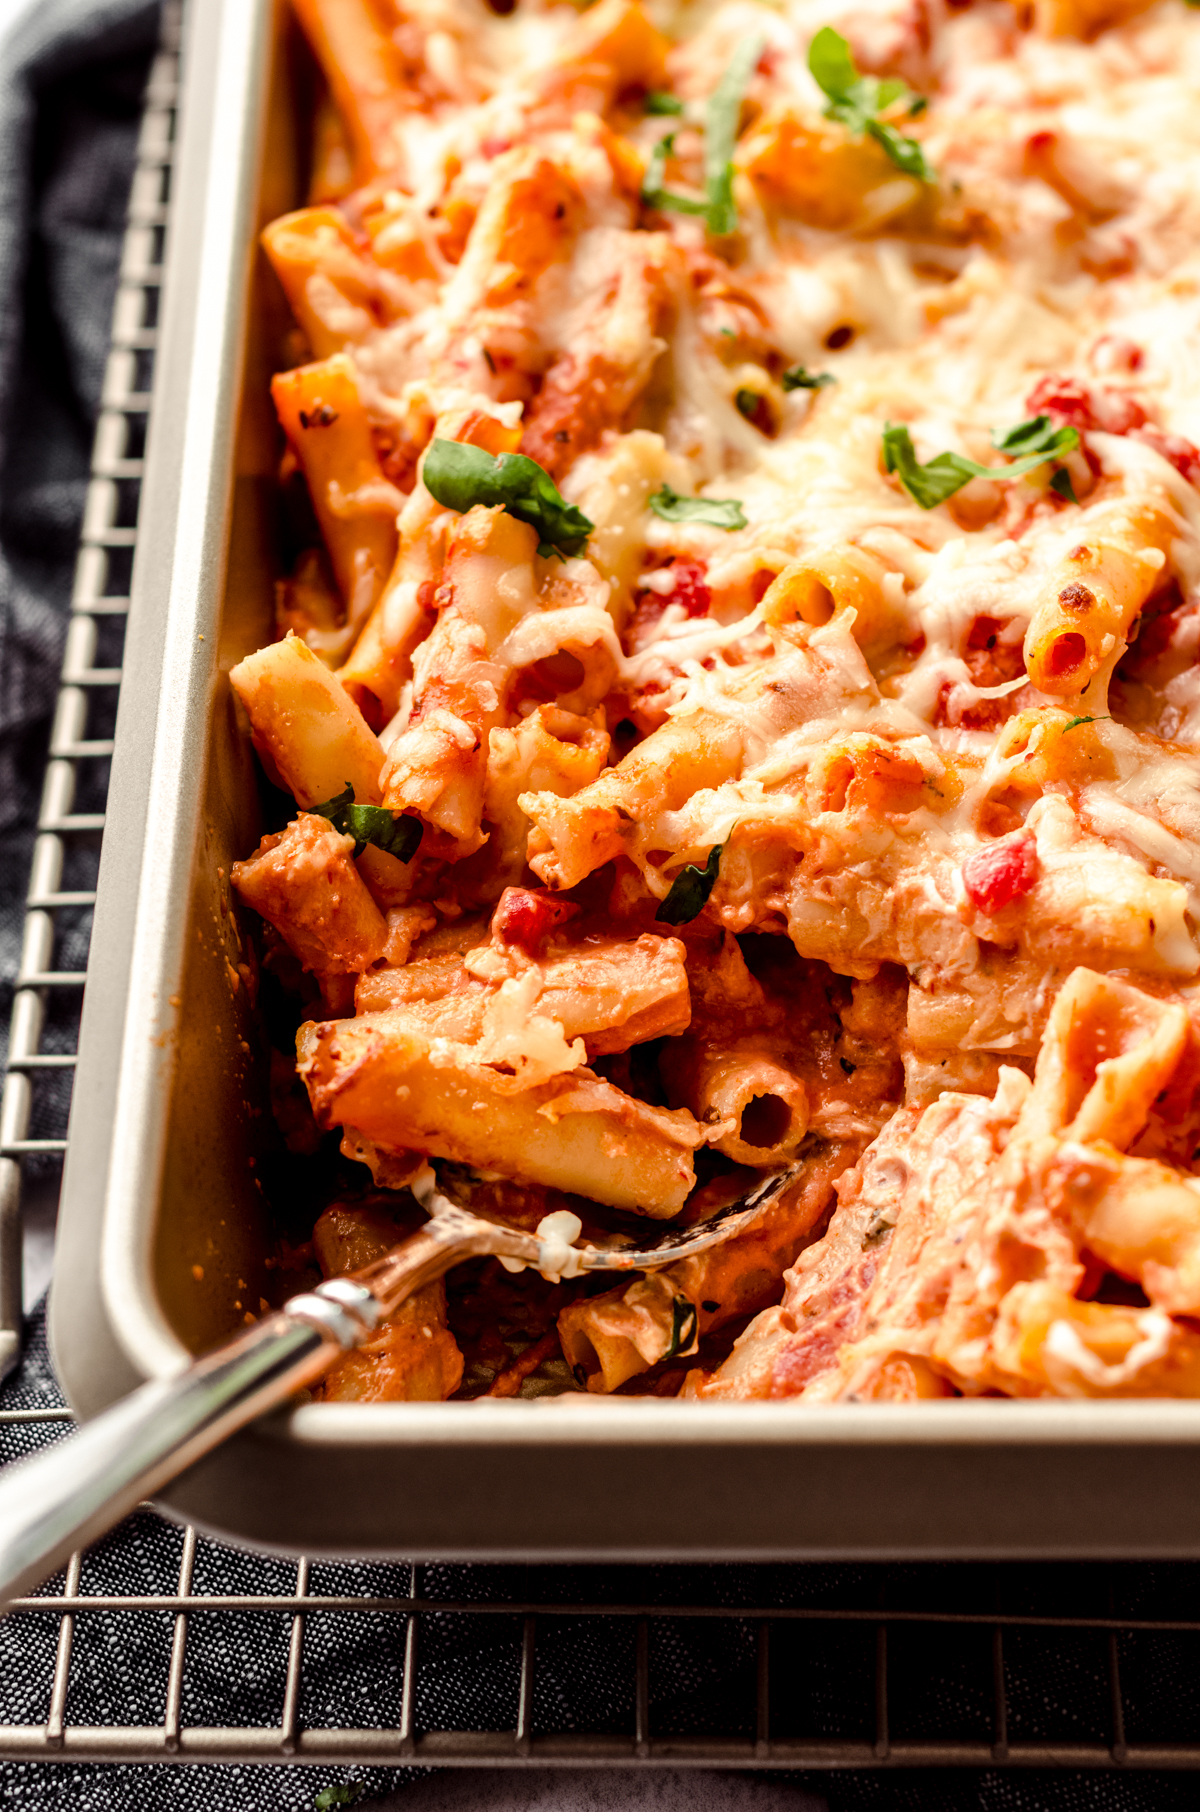 A serving spoon in a casserole dish of baked ziti.